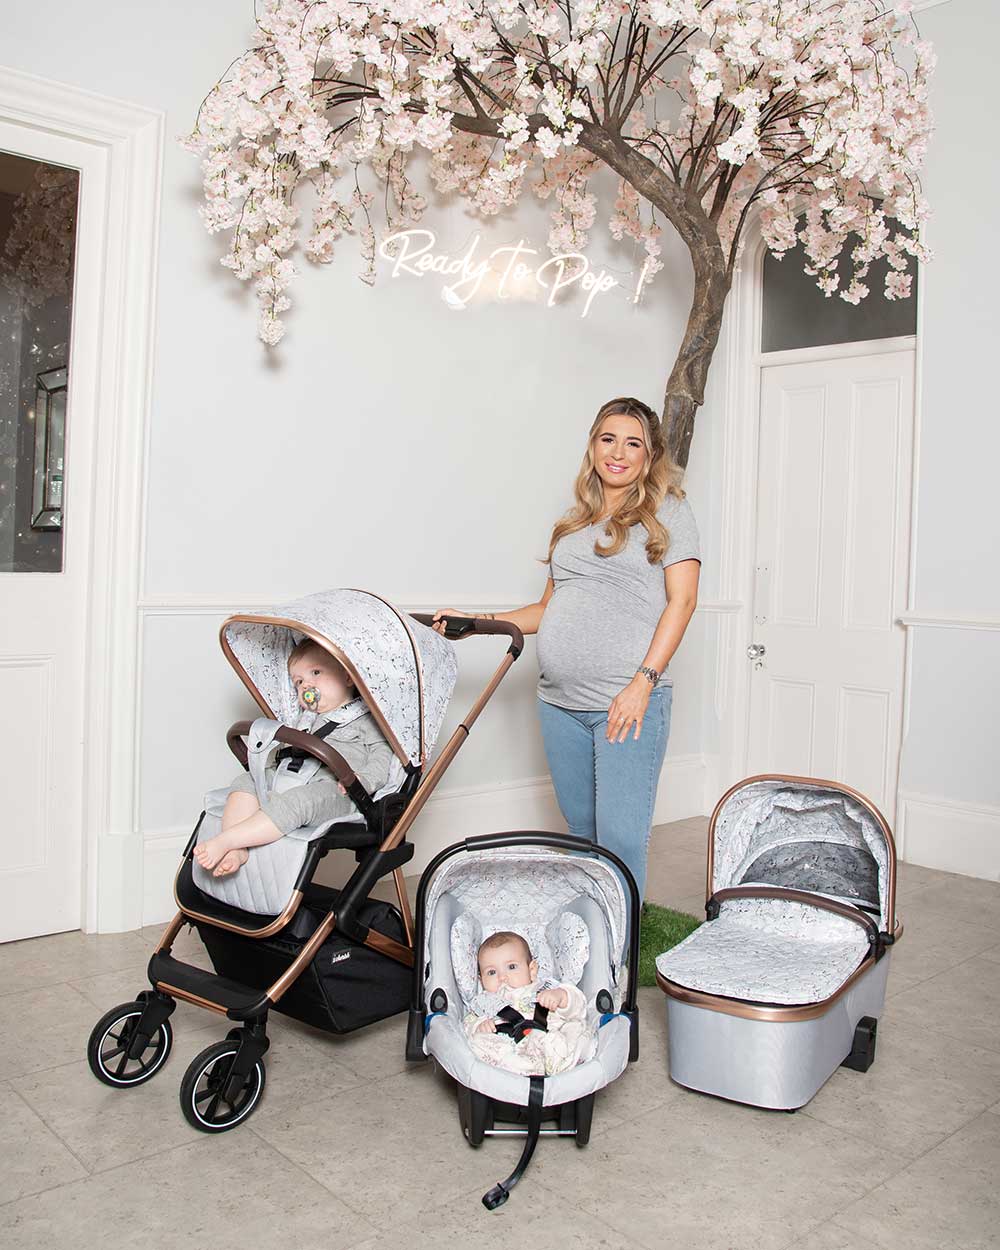 Dani Dyer standing next to a push chair and a carry cot